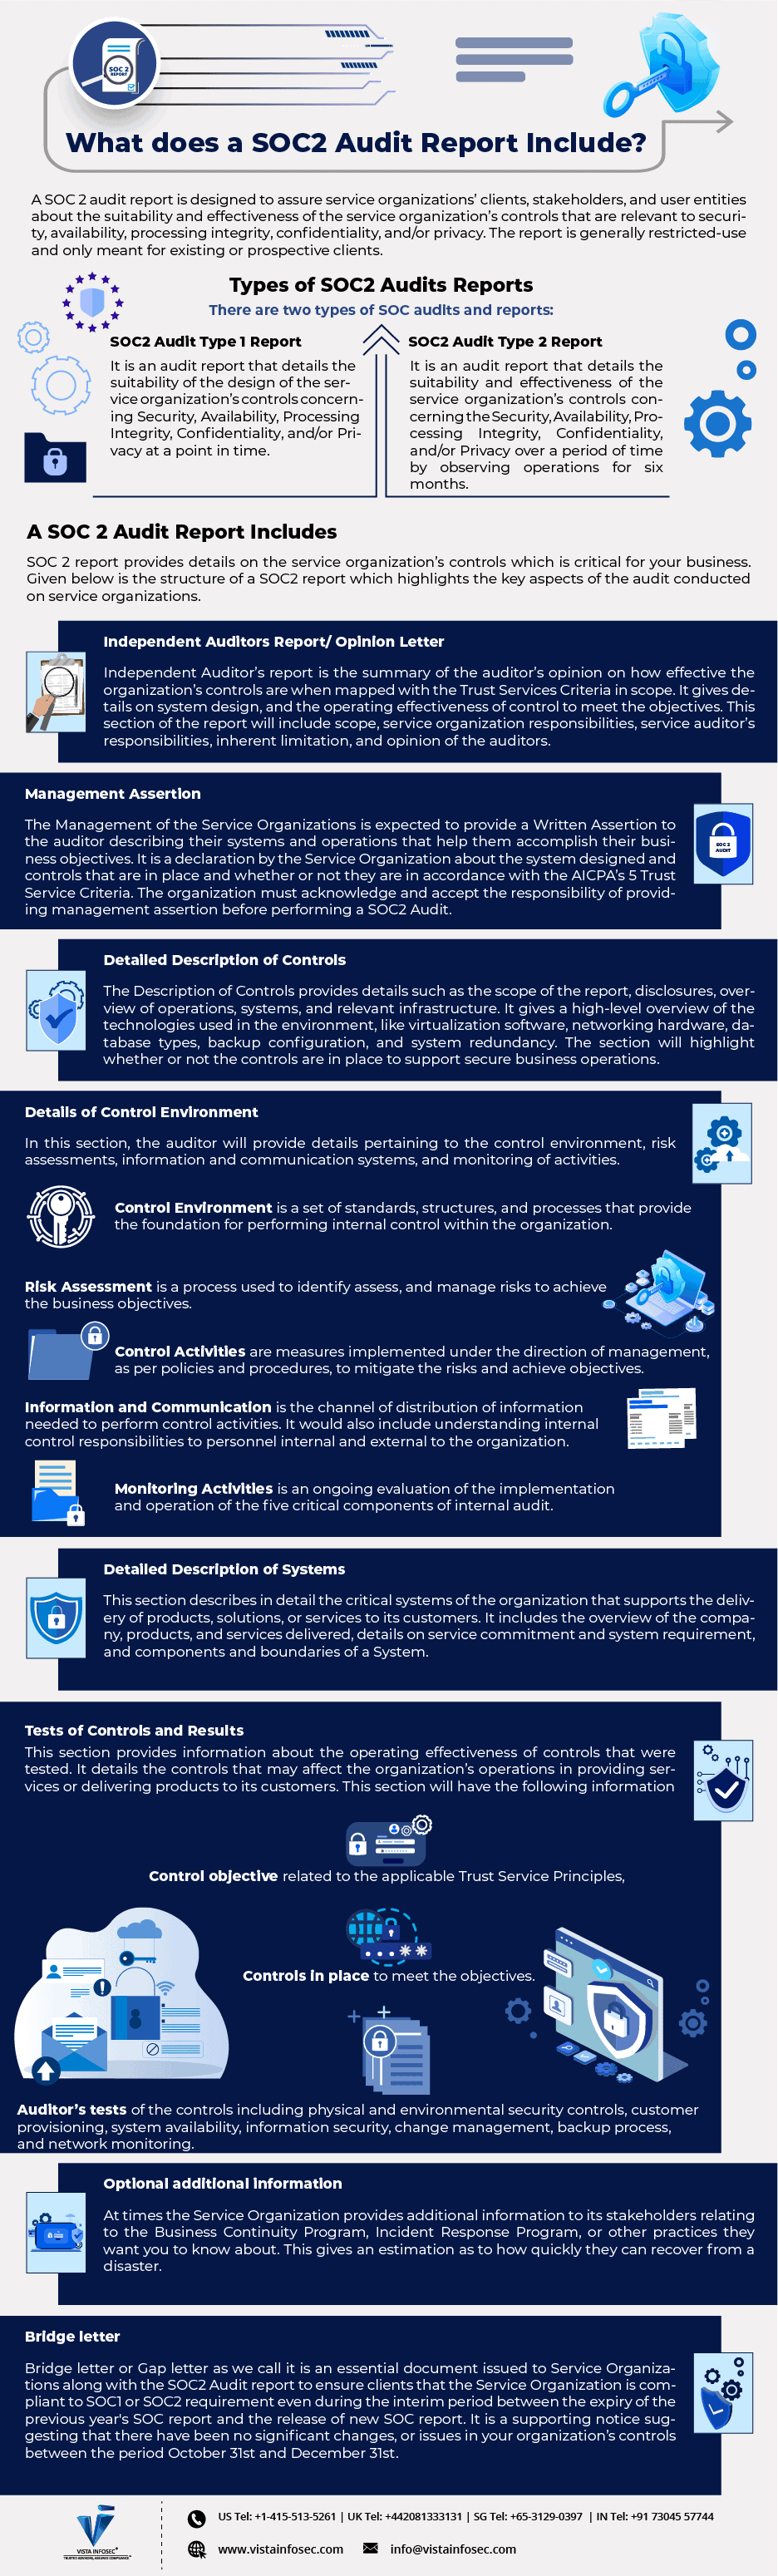 Infographic - What does soc2 report cover